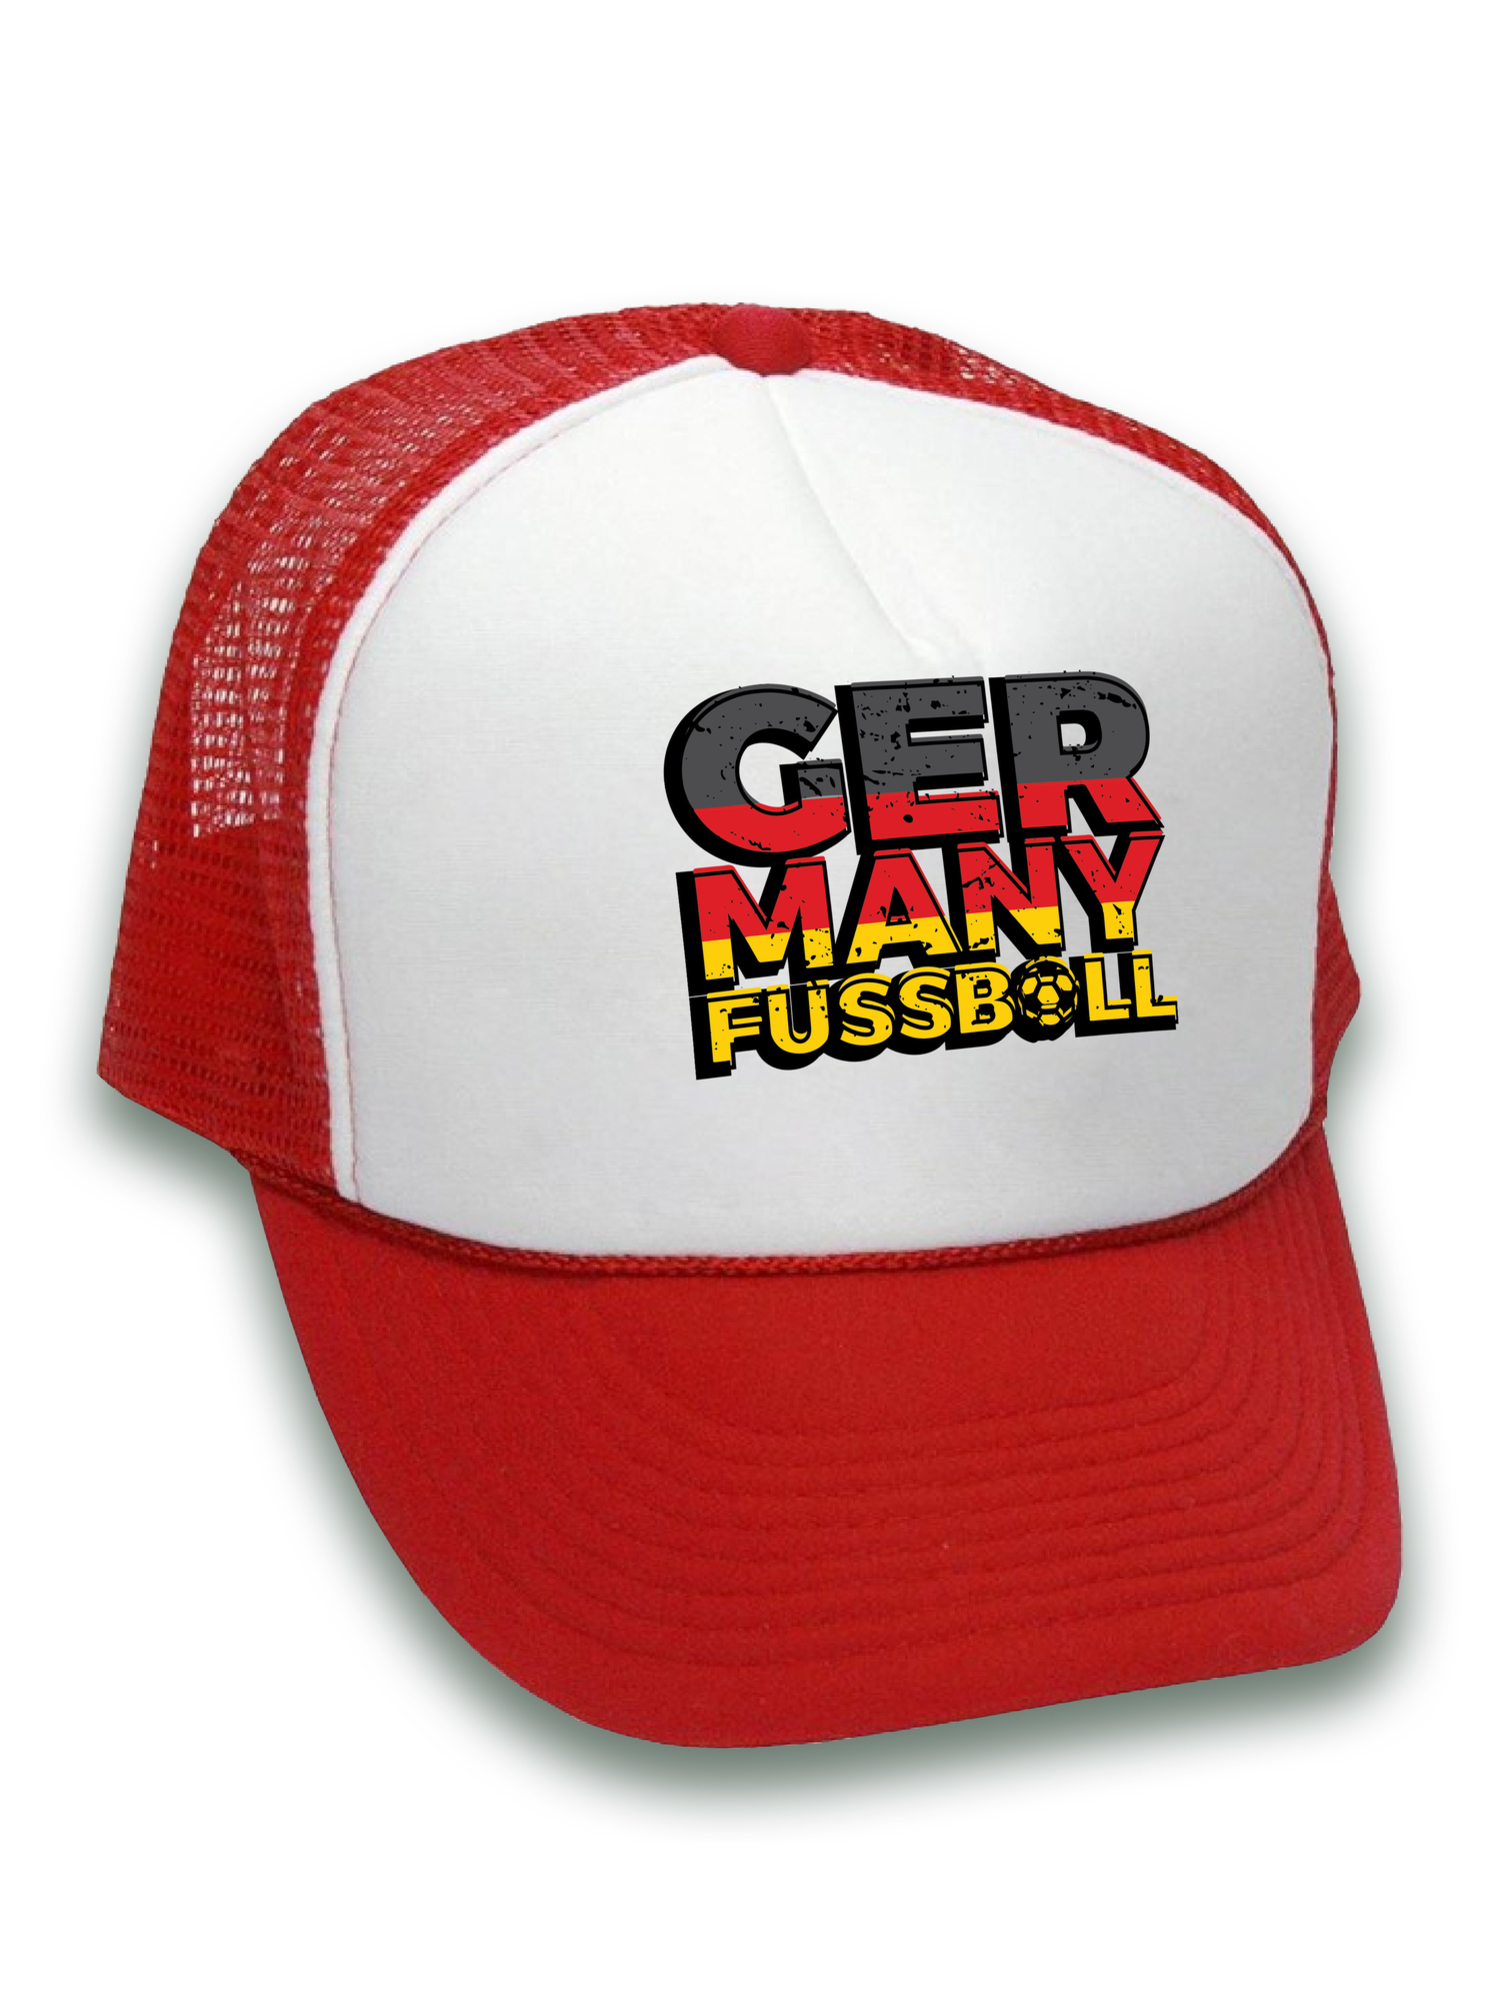 Awkward Styles Germany Fussball Hat Germany Trucker Hats for Men and Women Hat Gifts from Germany German Soccer Cap German Hats Unisex Germany Snapback Hat Germany 2018 Trucker Hats German Soccer Hat - image 2 of 6